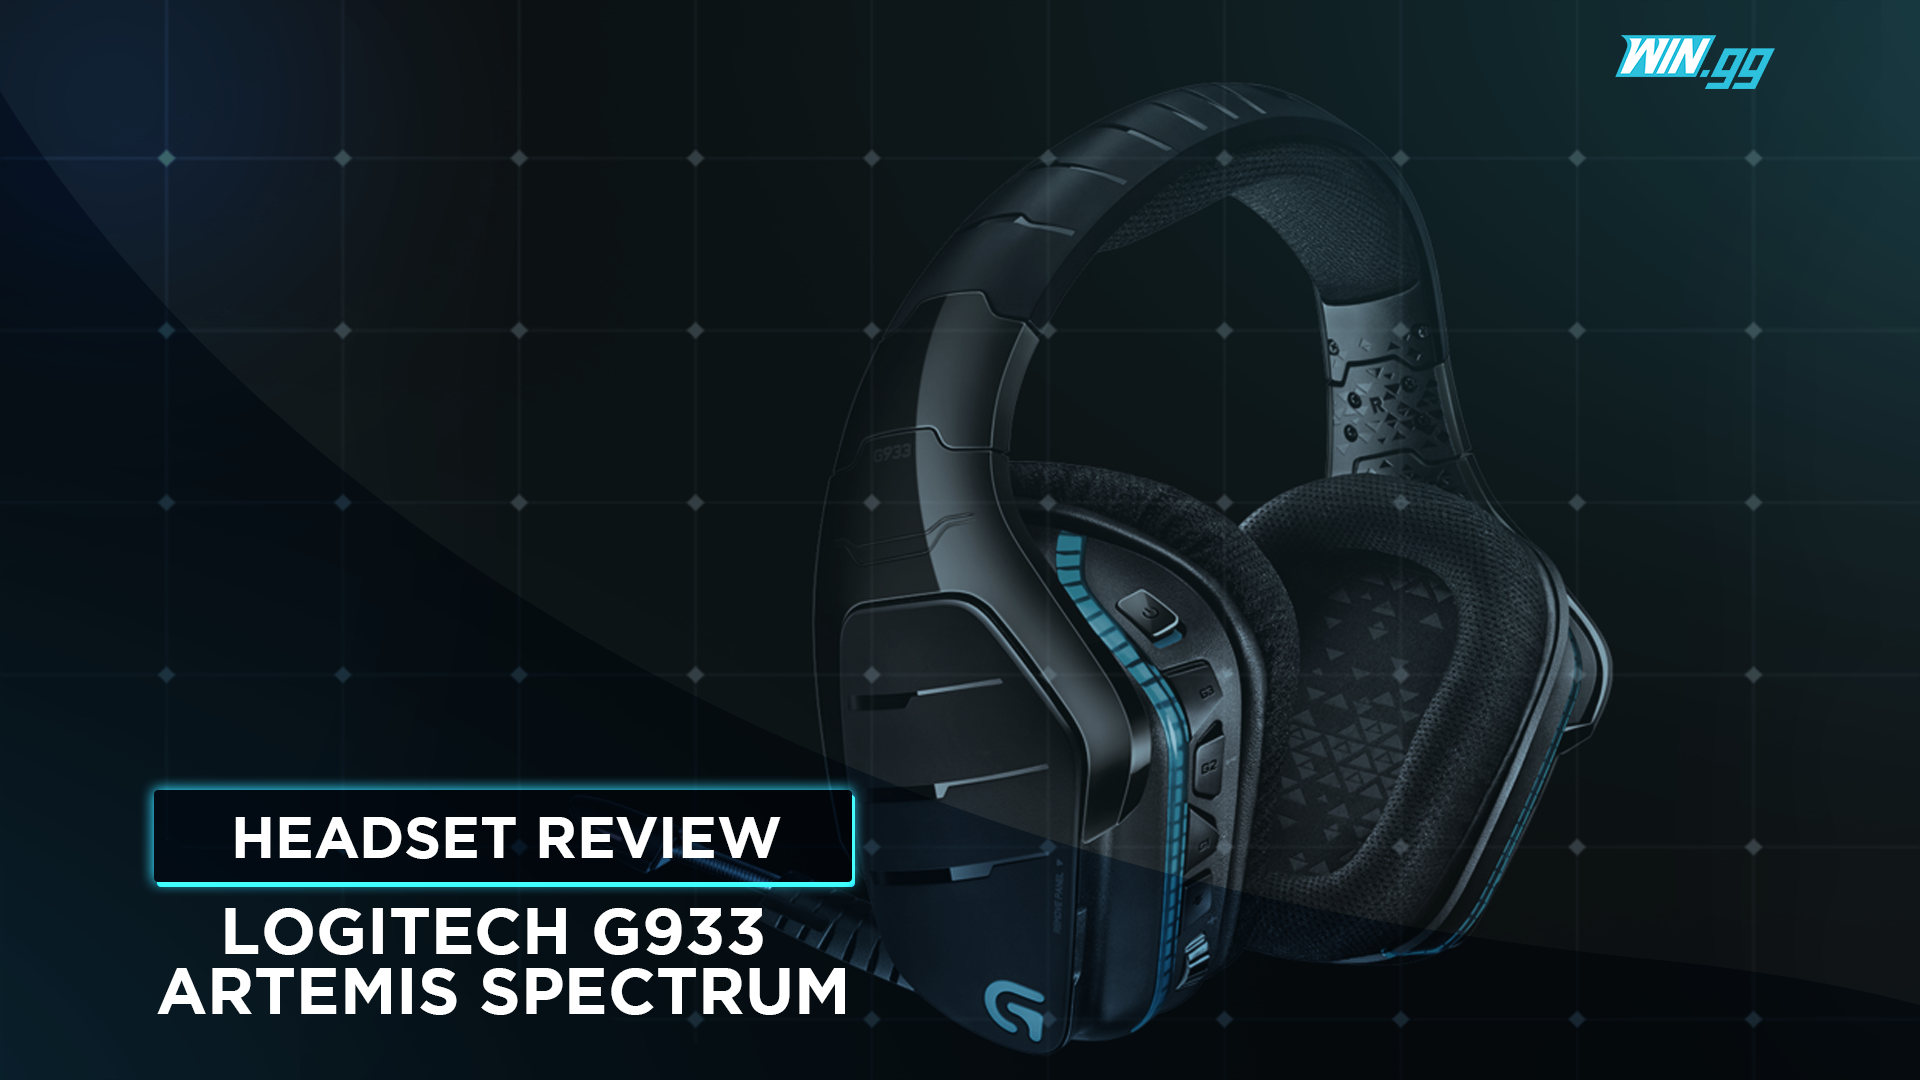 Our two-year review of the Spectrum gaming headset -